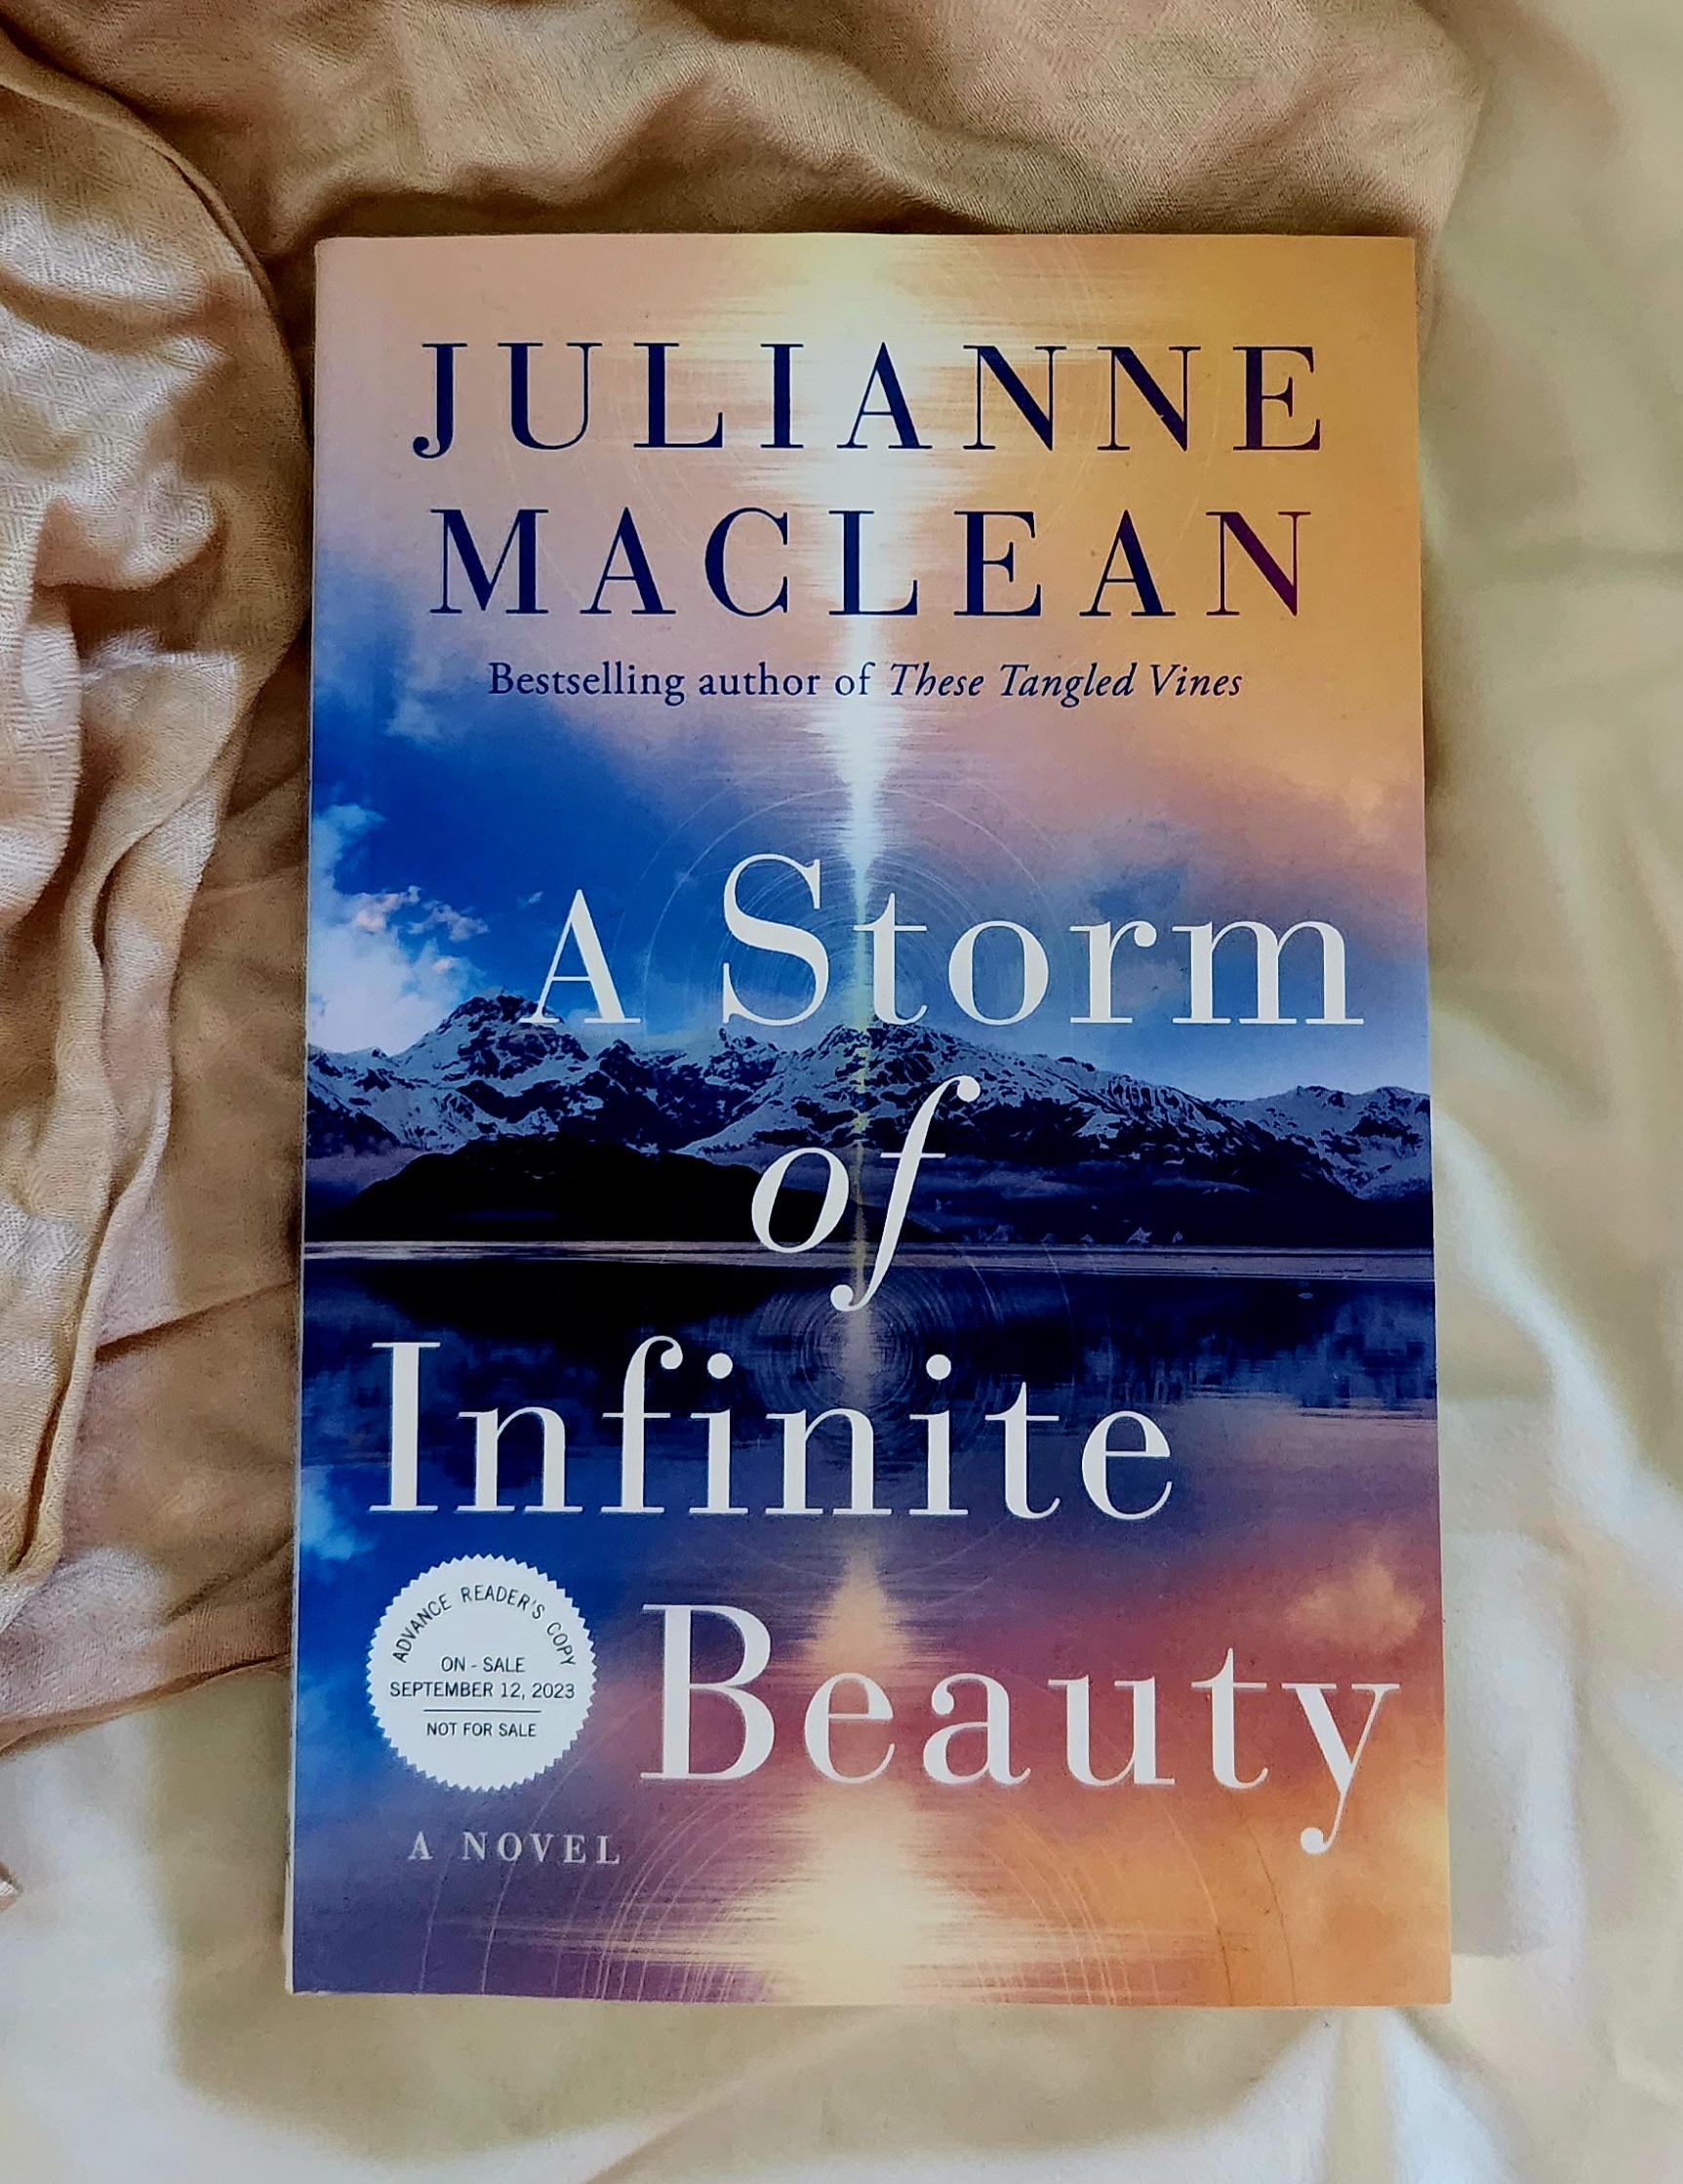 Book Cover of A STORM OF INFINITE BEAUTY by Julianne MacLean